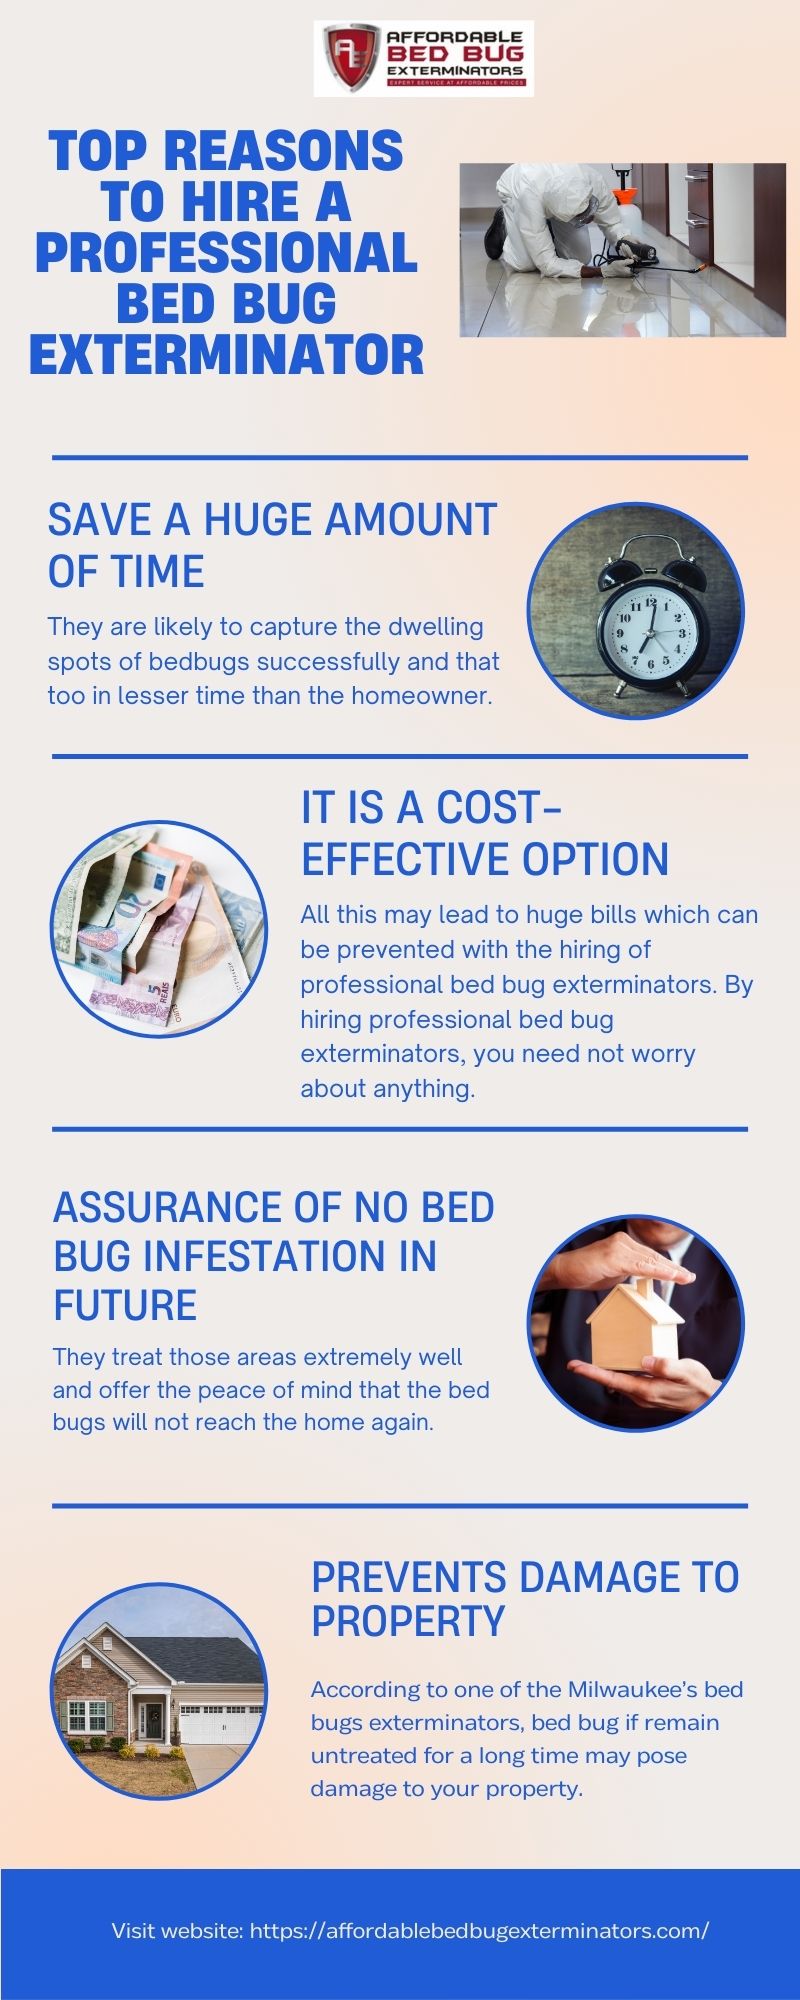 TOP REASONS TO HIRE A PROFESSIONAL BED BUG EXTERMINATOR